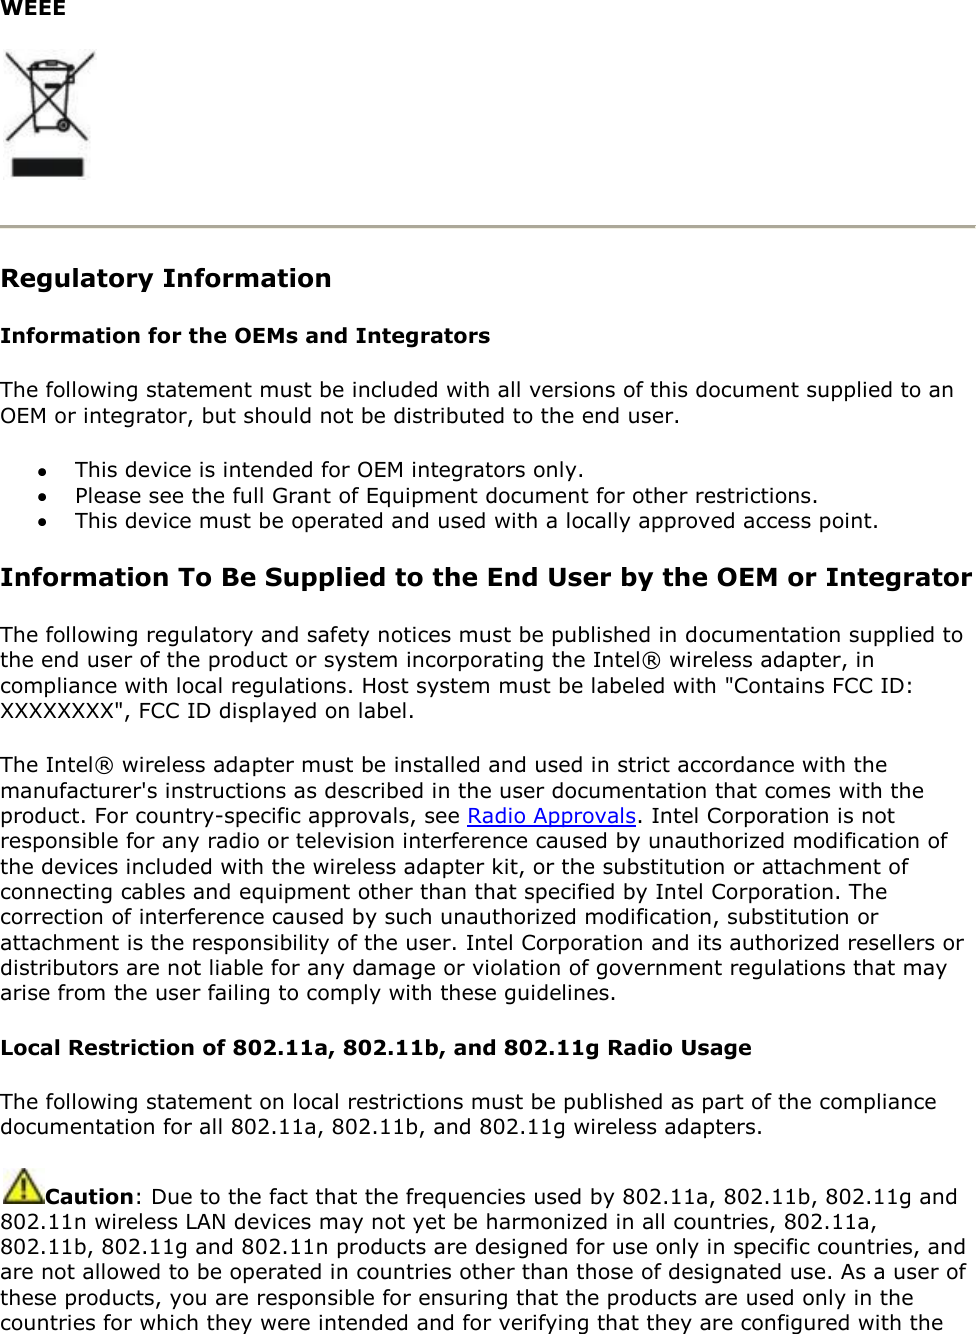 WEEE   Regulatory Information  Information for the OEMs and Integrators The following statement must be included with all versions of this document supplied to an OEM or integrator, but should not be distributed to the end user.  This device is intended for OEM integrators only.  Please see the full Grant of Equipment document for other restrictions.  This device must be operated and used with a locally approved access point. Information To Be Supplied to the End User by the OEM or Integrator The following regulatory and safety notices must be published in documentation supplied to the end user of the product or system incorporating the Intel® wireless adapter, in compliance with local regulations. Host system must be labeled with &quot;Contains FCC ID: XXXXXXXX&quot;, FCC ID displayed on label. The Intel® wireless adapter must be installed and used in strict accordance with the manufacturer&apos;s instructions as described in the user documentation that comes with the product. For country-specific approvals, see Radio Approvals. Intel Corporation is not responsible for any radio or television interference caused by unauthorized modification of the devices included with the wireless adapter kit, or the substitution or attachment of connecting cables and equipment other than that specified by Intel Corporation. The correction of interference caused by such unauthorized modification, substitution or attachment is the responsibility of the user. Intel Corporation and its authorized resellers or distributors are not liable for any damage or violation of government regulations that may arise from the user failing to comply with these guidelines. Local Restriction of 802.11a, 802.11b, and 802.11g Radio Usage The following statement on local restrictions must be published as part of the compliance documentation for all 802.11a, 802.11b, and 802.11g wireless adapters. Caution: Due to the fact that the frequencies used by 802.11a, 802.11b, 802.11g and 802.11n wireless LAN devices may not yet be harmonized in all countries, 802.11a, 802.11b, 802.11g and 802.11n products are designed for use only in specific countries, and are not allowed to be operated in countries other than those of designated use. As a user of these products, you are responsible for ensuring that the products are used only in the countries for which they were intended and for verifying that they are configured with the 